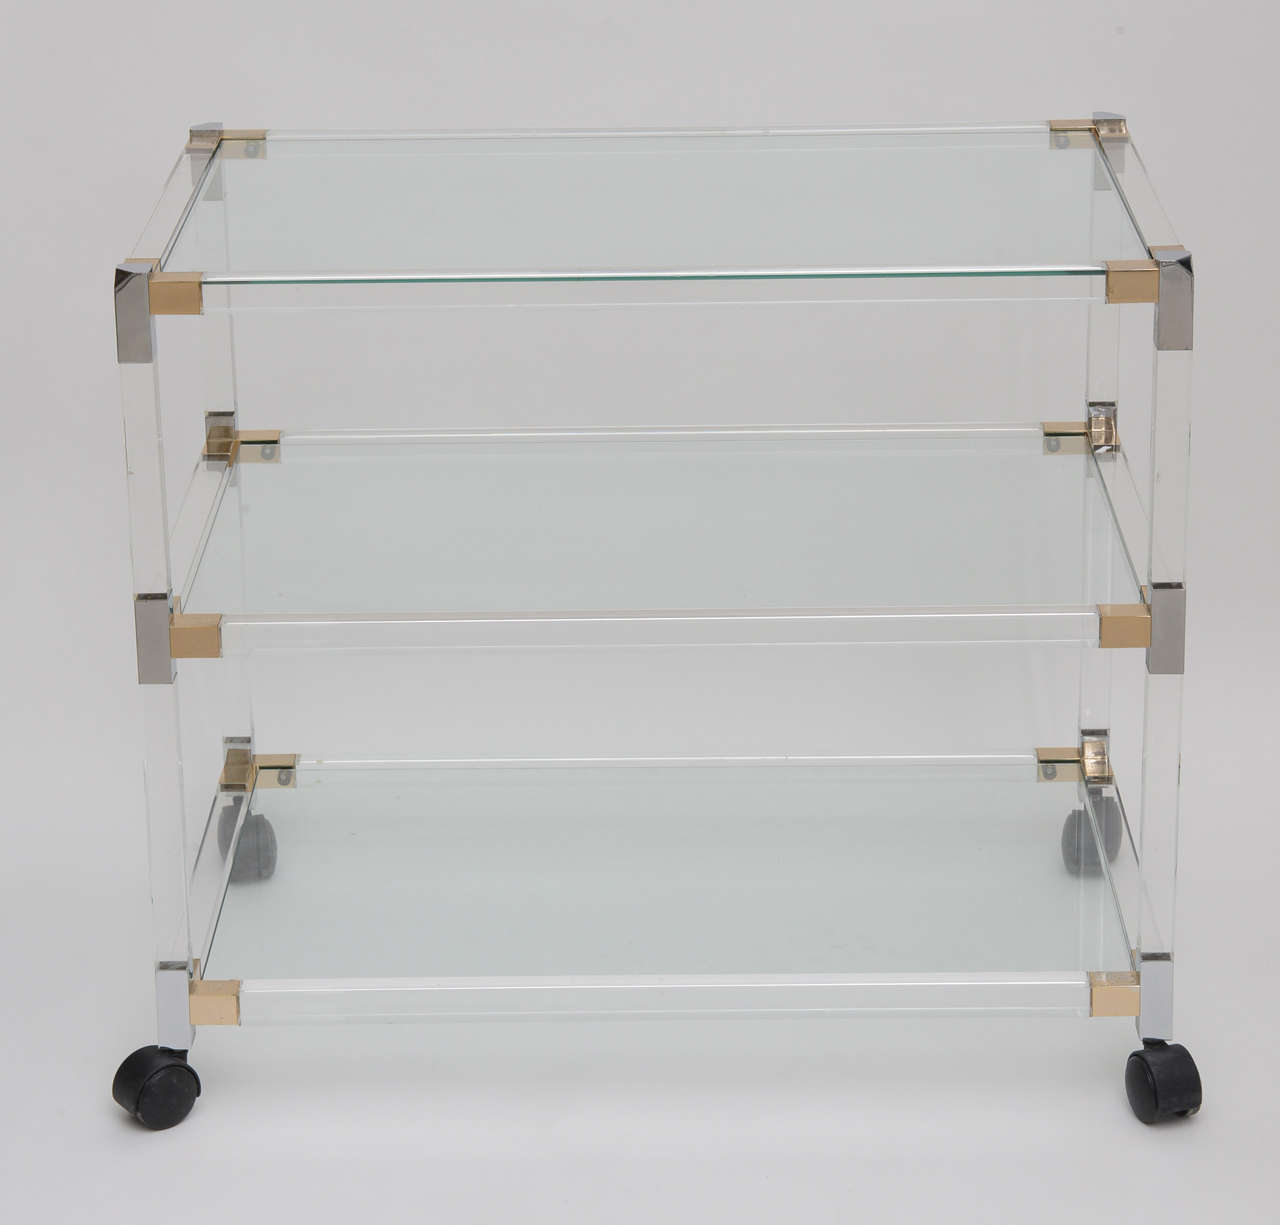 Vintage lucite bar cart with two- tone chrome and brass geometric corner accents. The trolley has three glass shelves for barware.